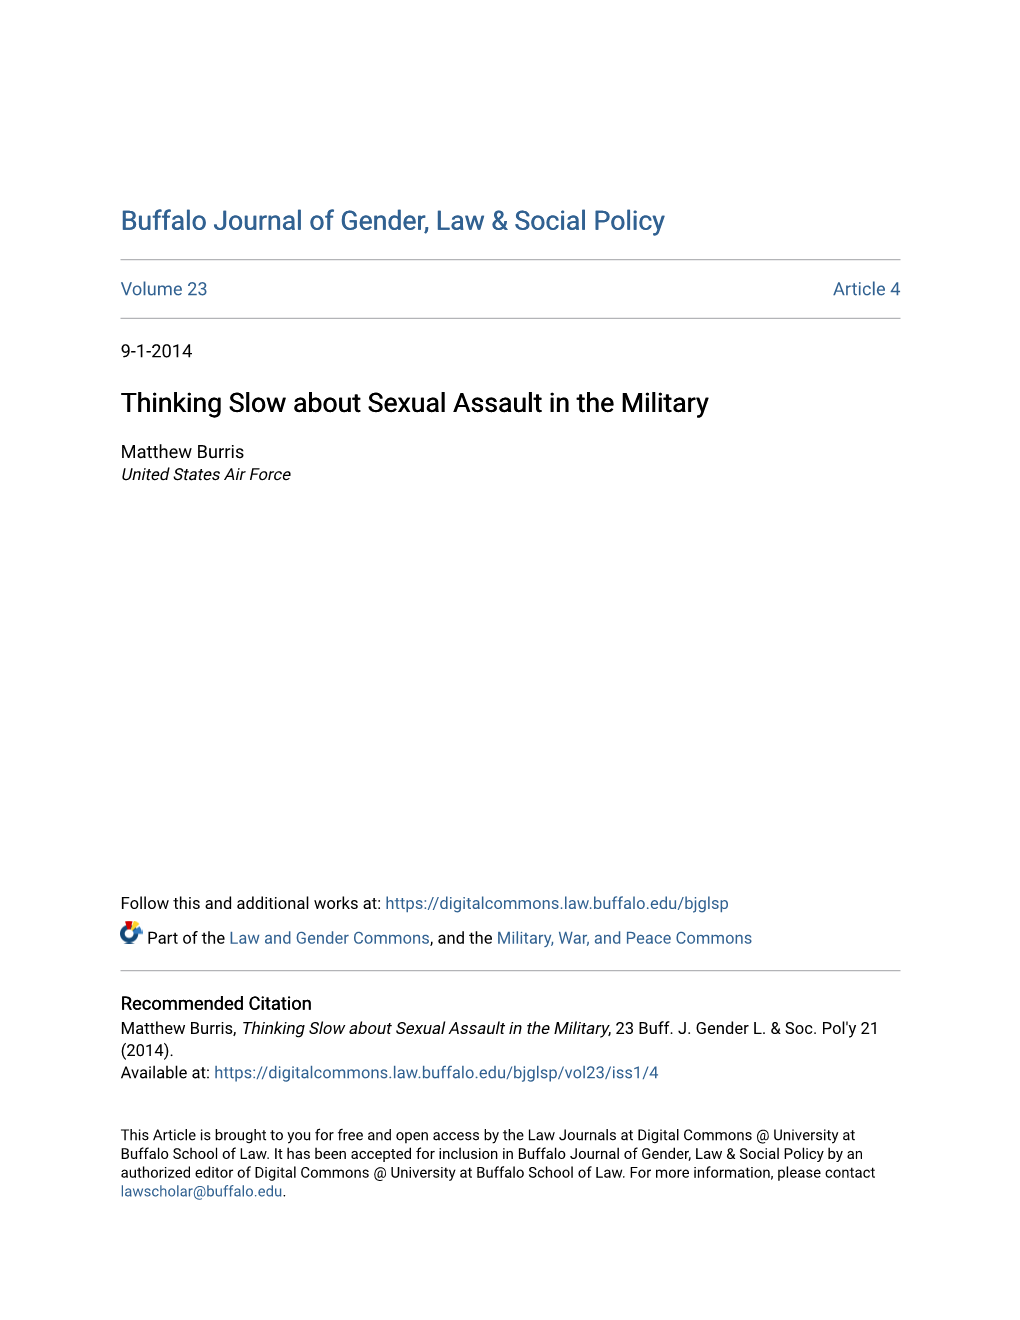 Thinking Slow About Sexual Assault in the Military